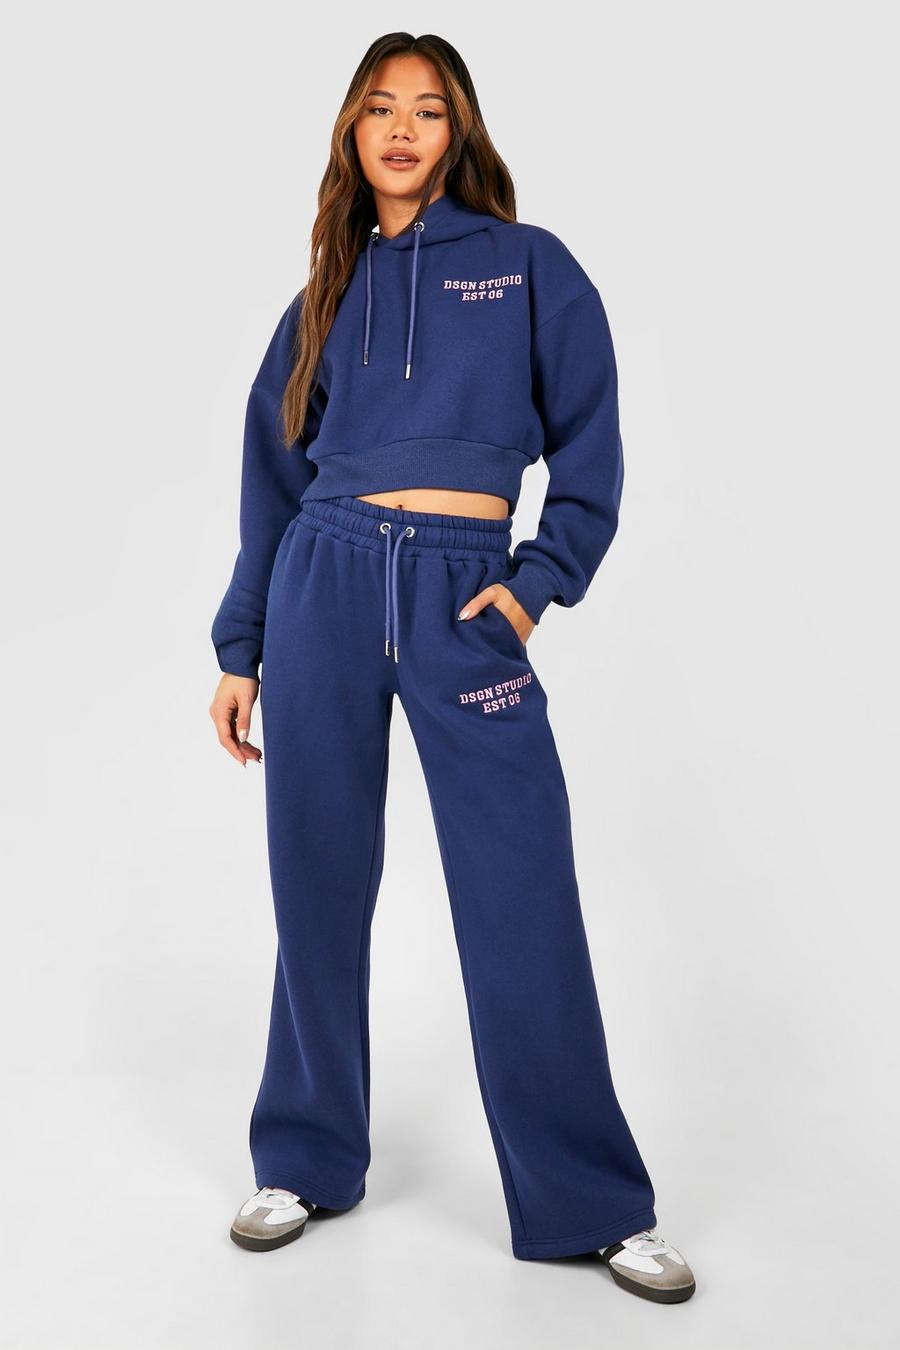 Navy Dsgn Studio Embroidered Cropped Hooded Tracksuit 